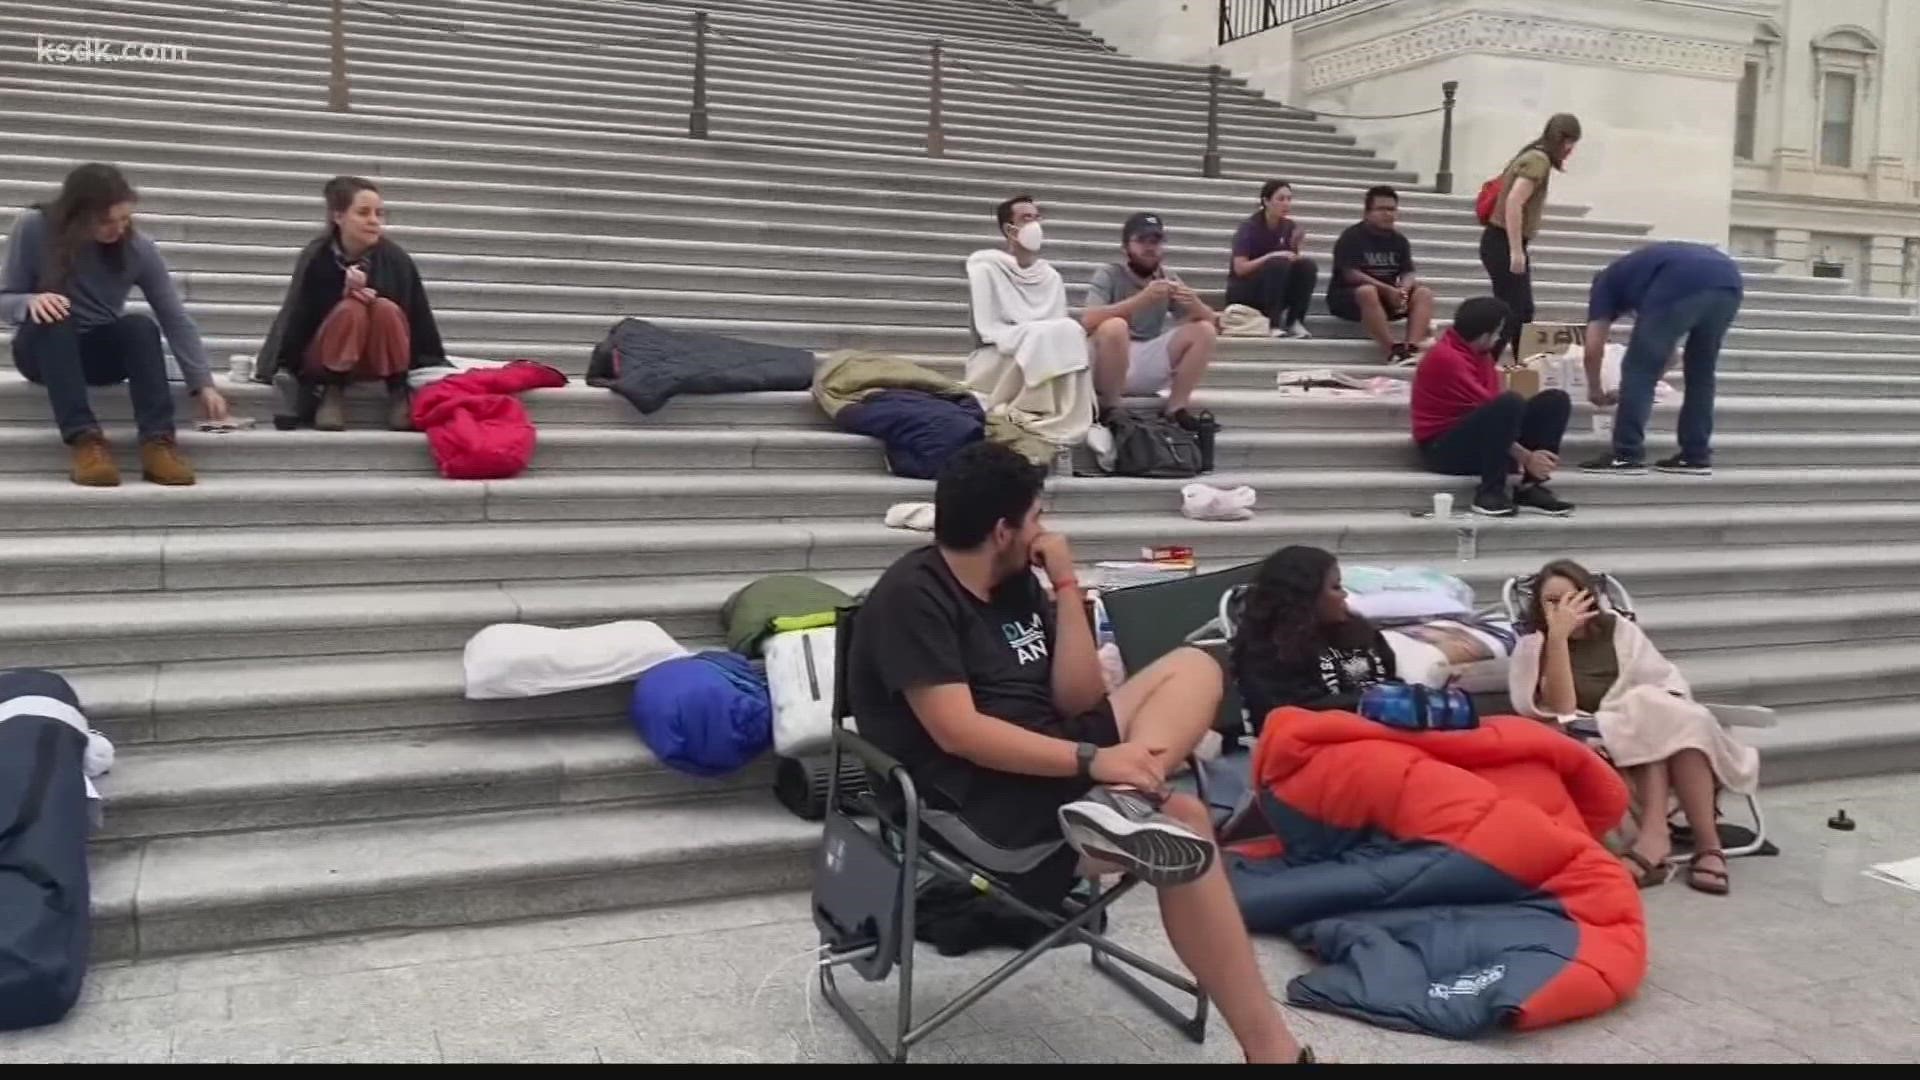 U.S. Rep. Cori Bush was sleeping outside U.S. Capitol Building for the third straight night in response to the federal eviction moratorium expiring this weekend.